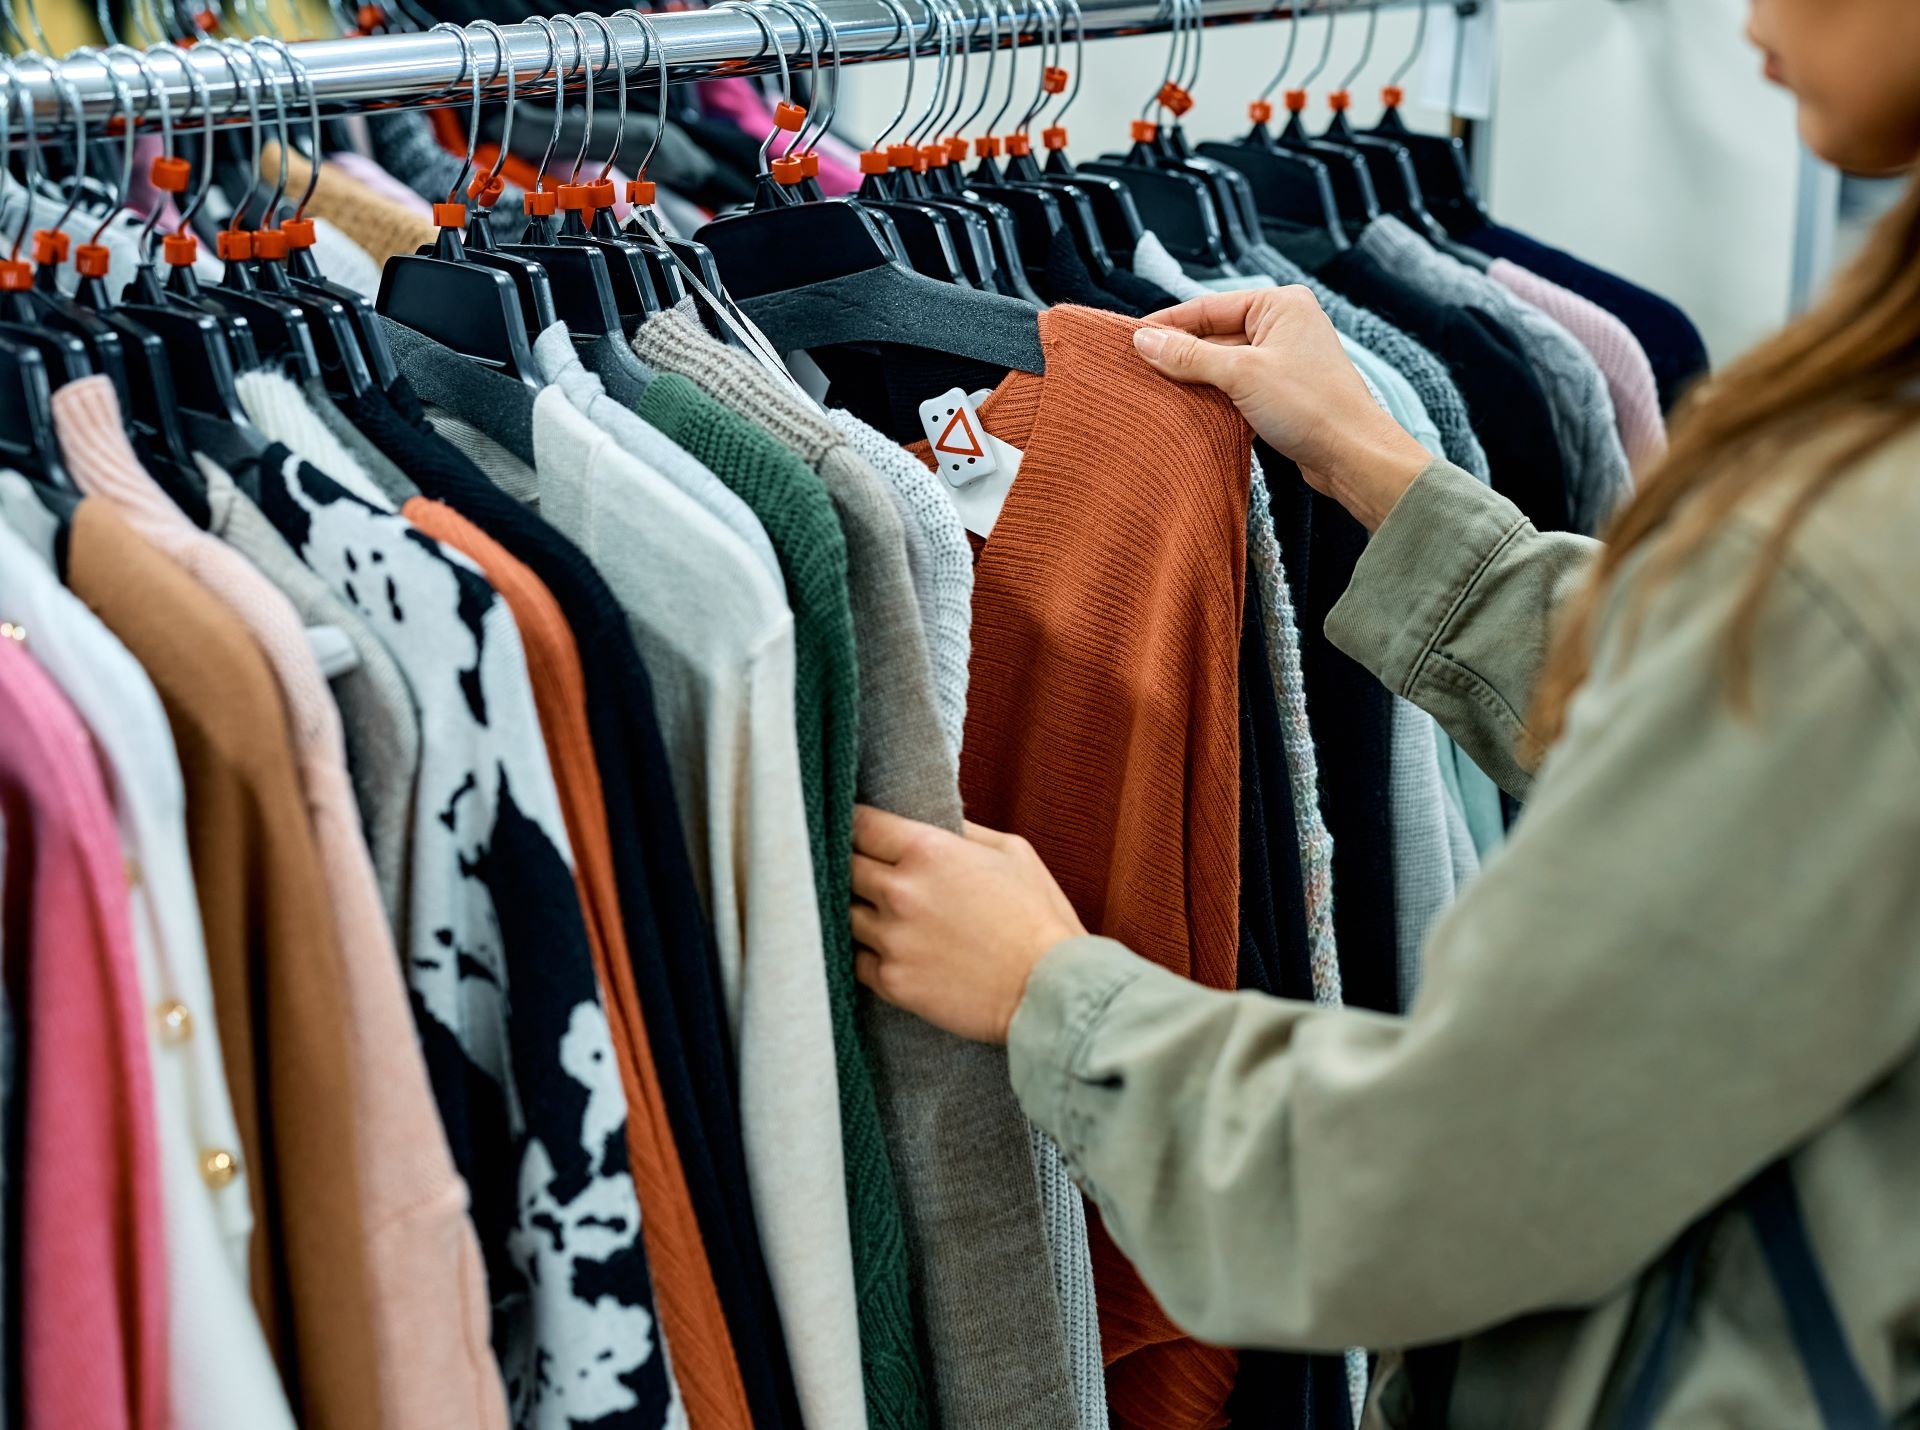 Fast fashion is having a startling effect on our clothes